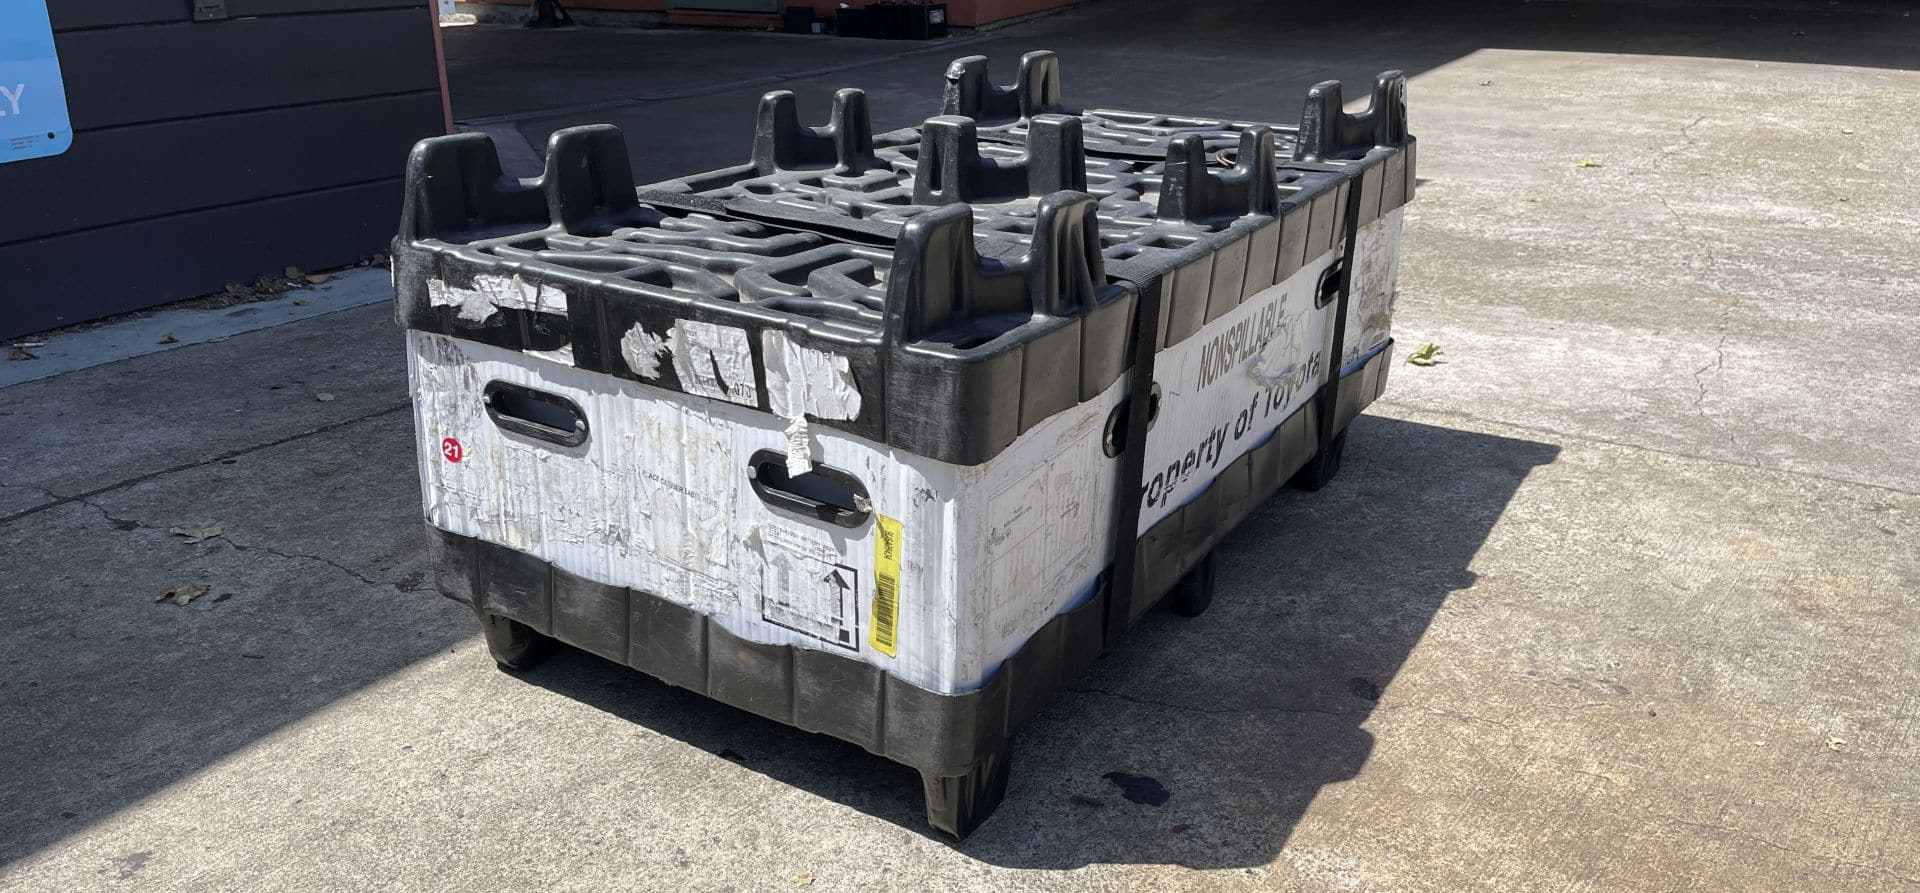 A reusable Toyota hybrid battery container sitting on the floor.